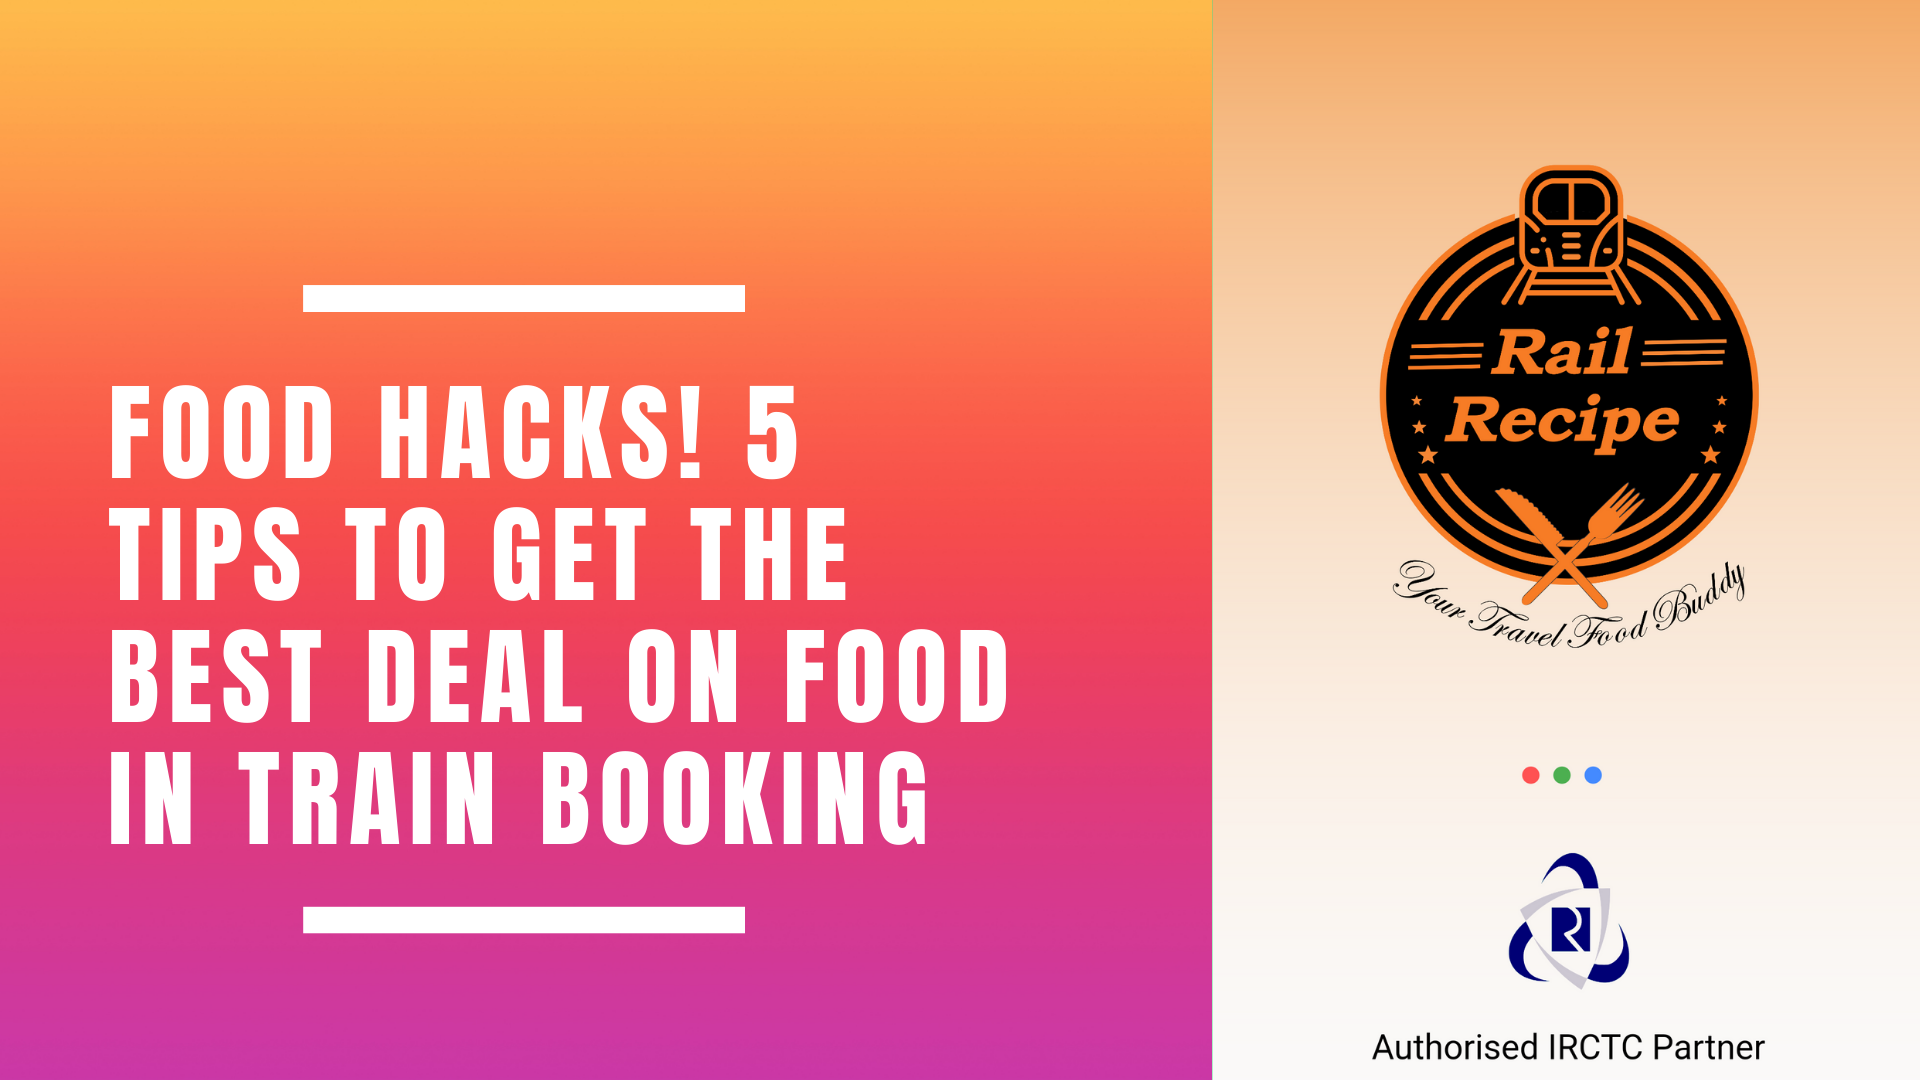 BEST Deal on Food in Train Booking